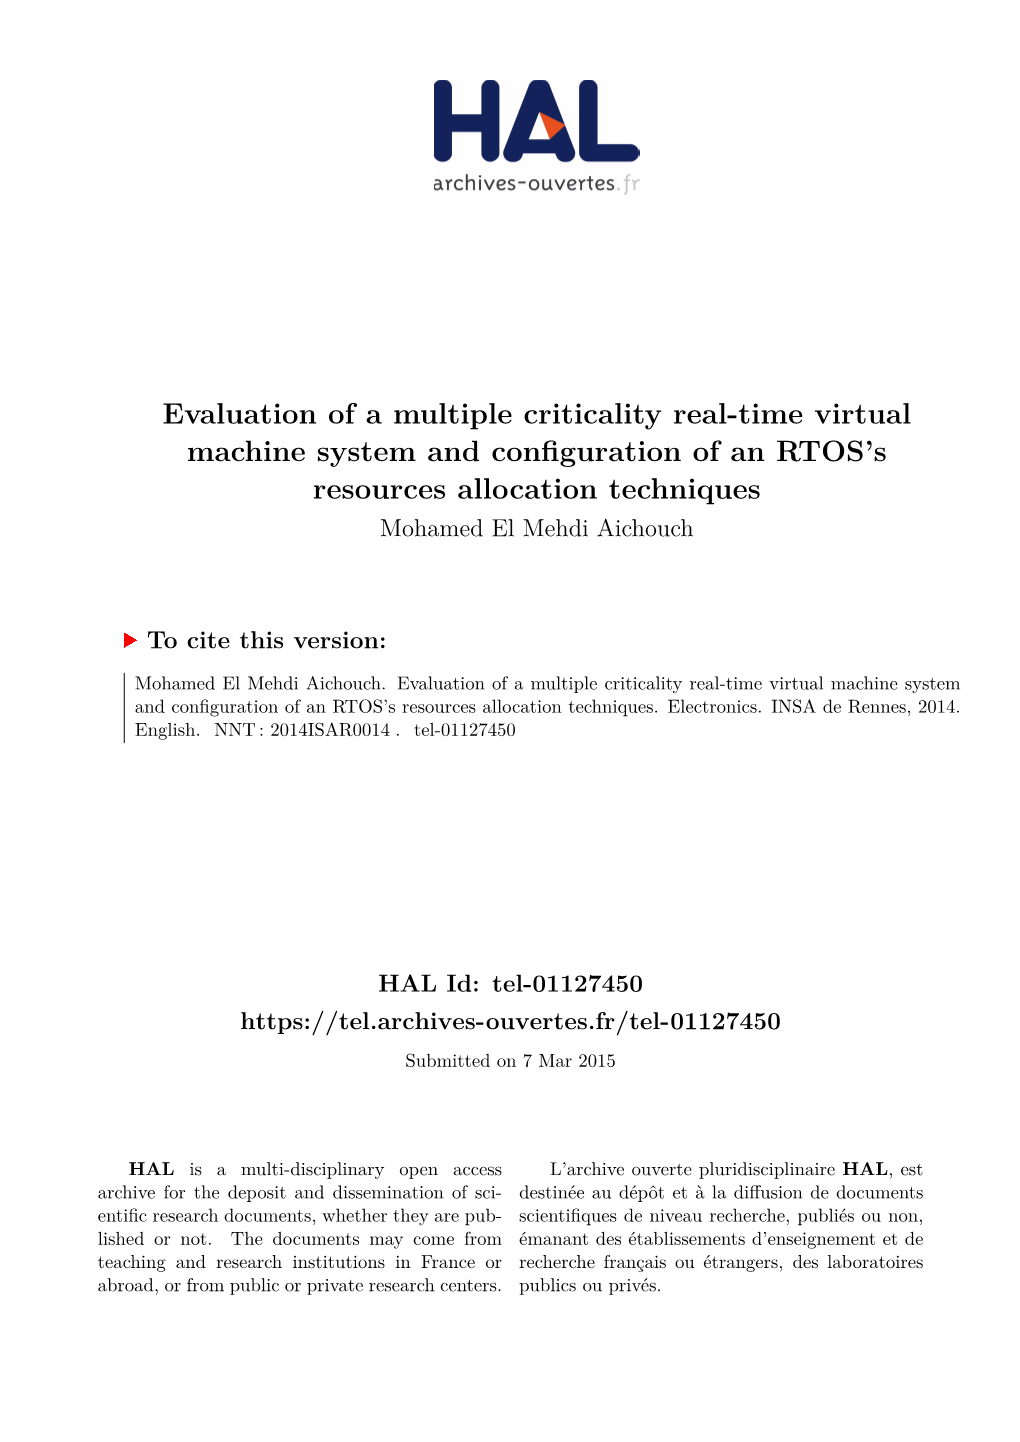 Evaluation of a Multiple Criticality Real-Time Virtual Machine System and Configuration of an RTOS's Resources Allocation Te